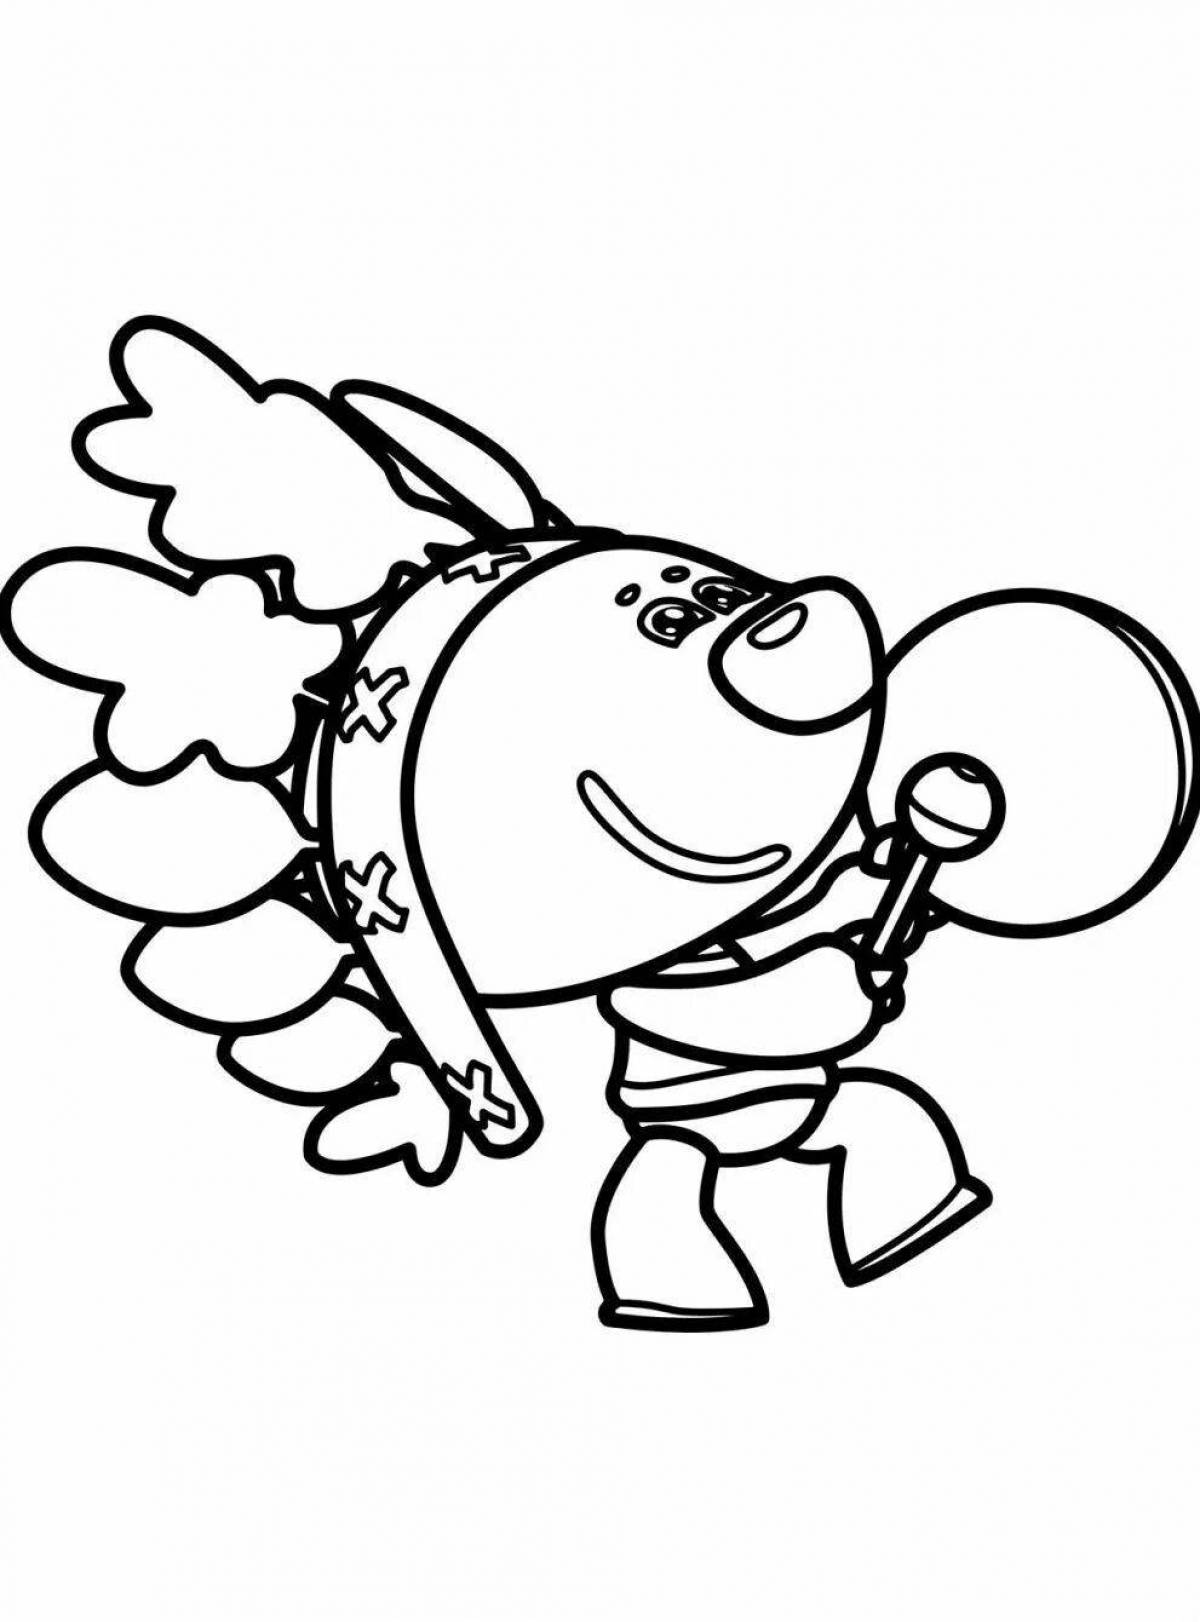 Merry Mole Coloring Page from Mimimishka